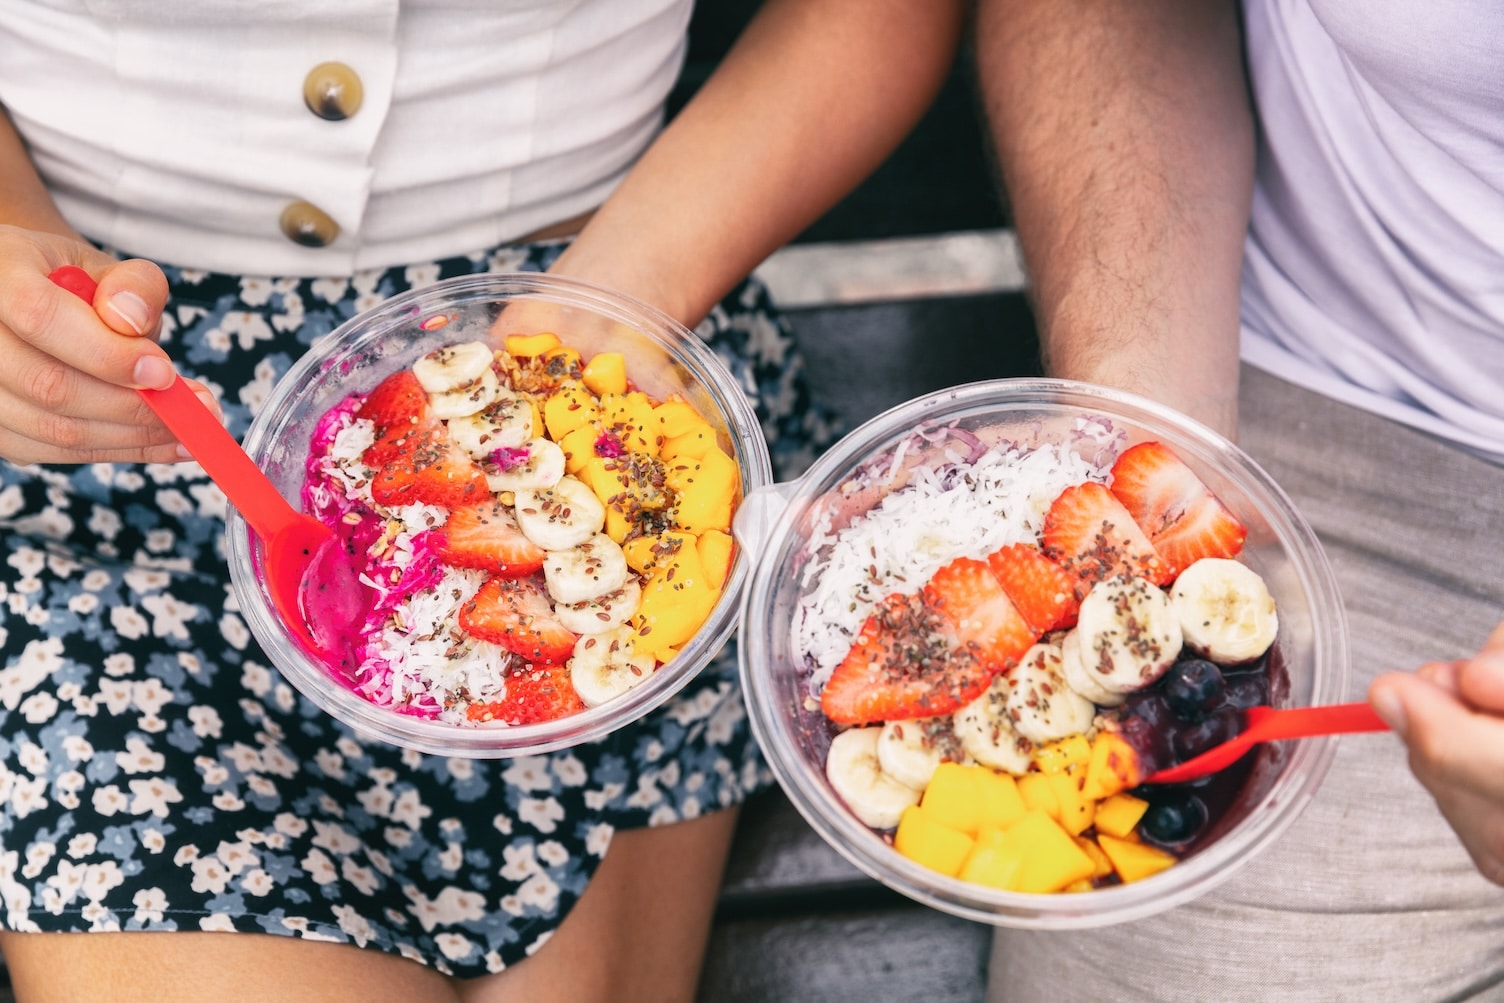 5 Healthy Eating Tips For Summer To Keep On Track | MyFitnessPal